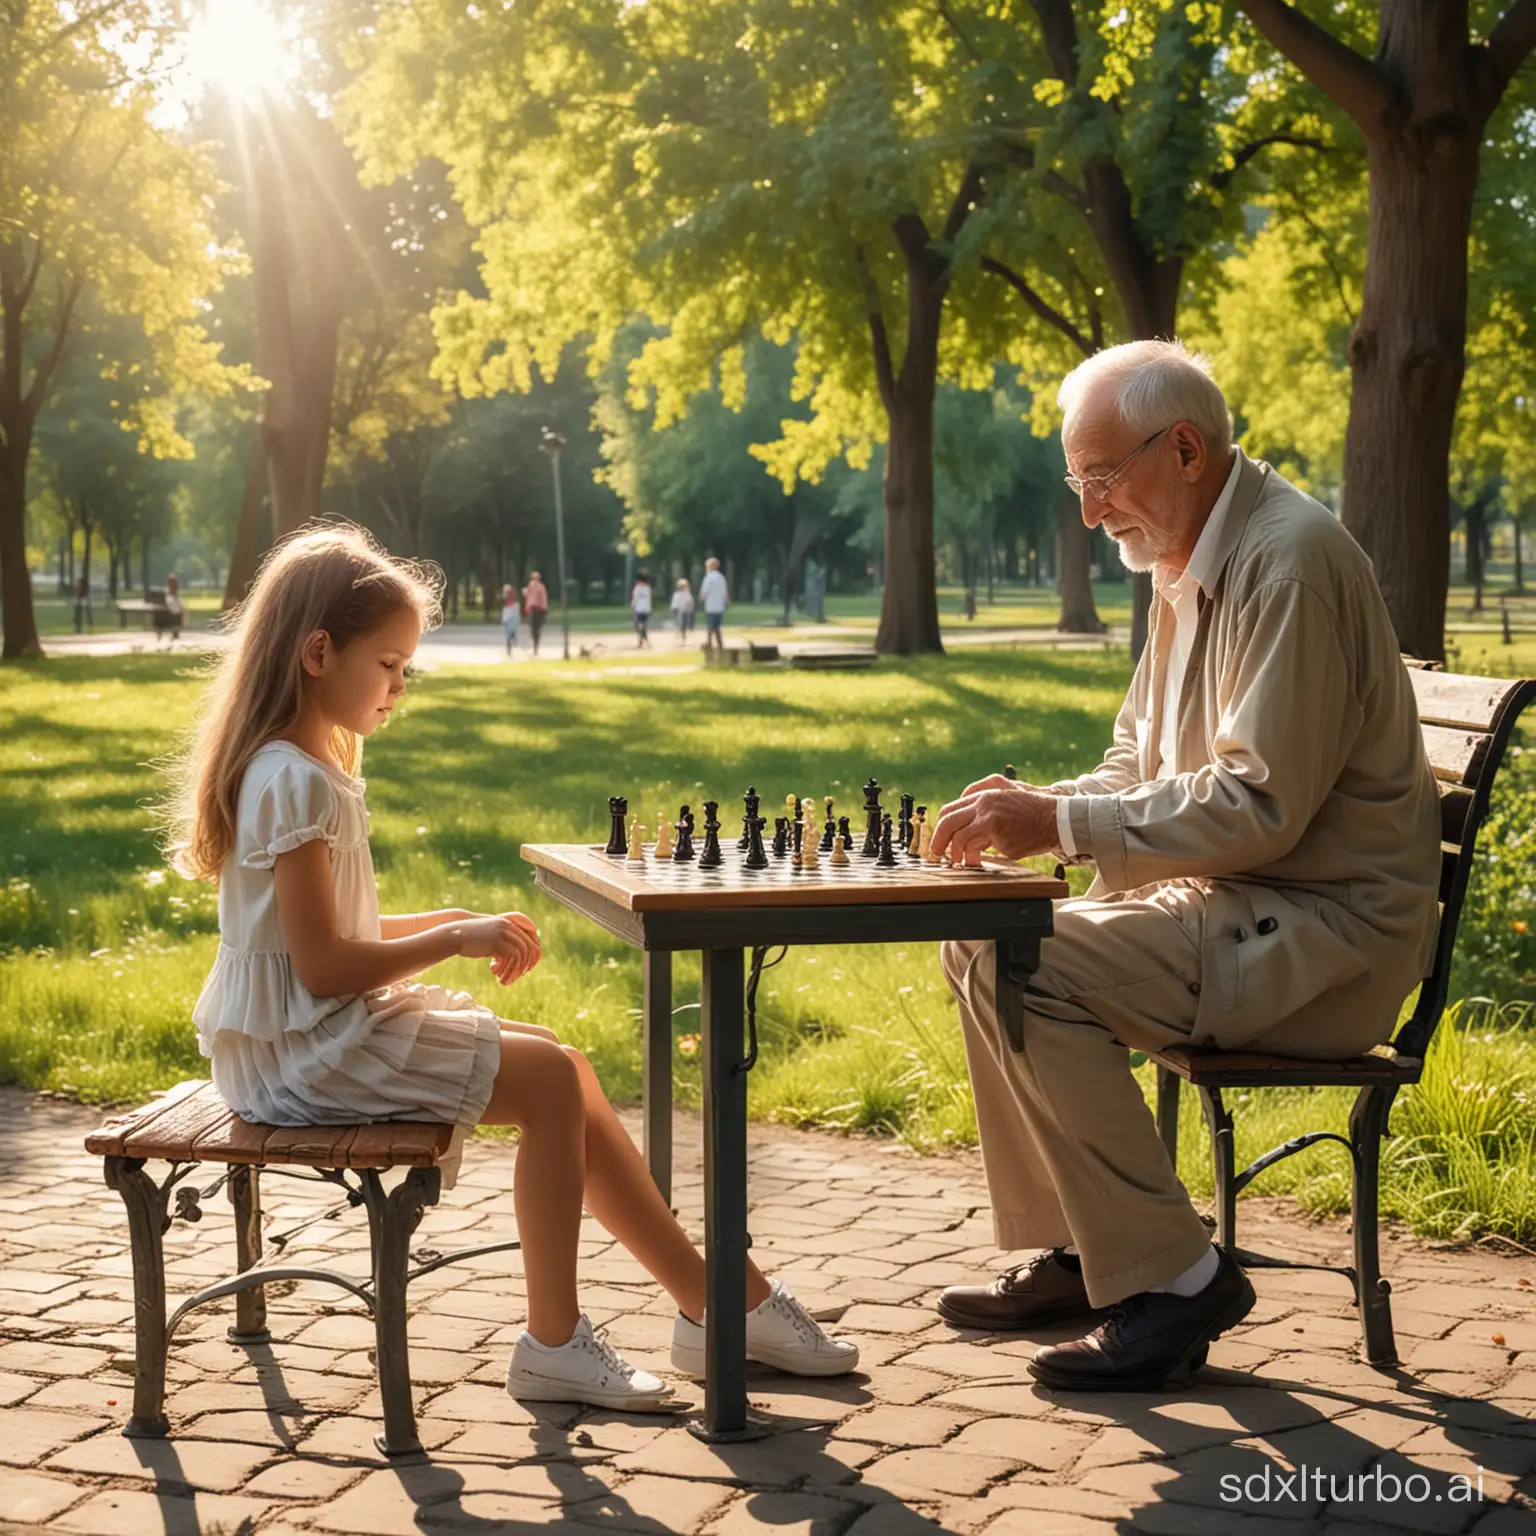 An old, old grandfather and a little girl play chess in a deserted park on a bench. It's nice weather. The sun is shining. There is a lot of vegetation in the background.